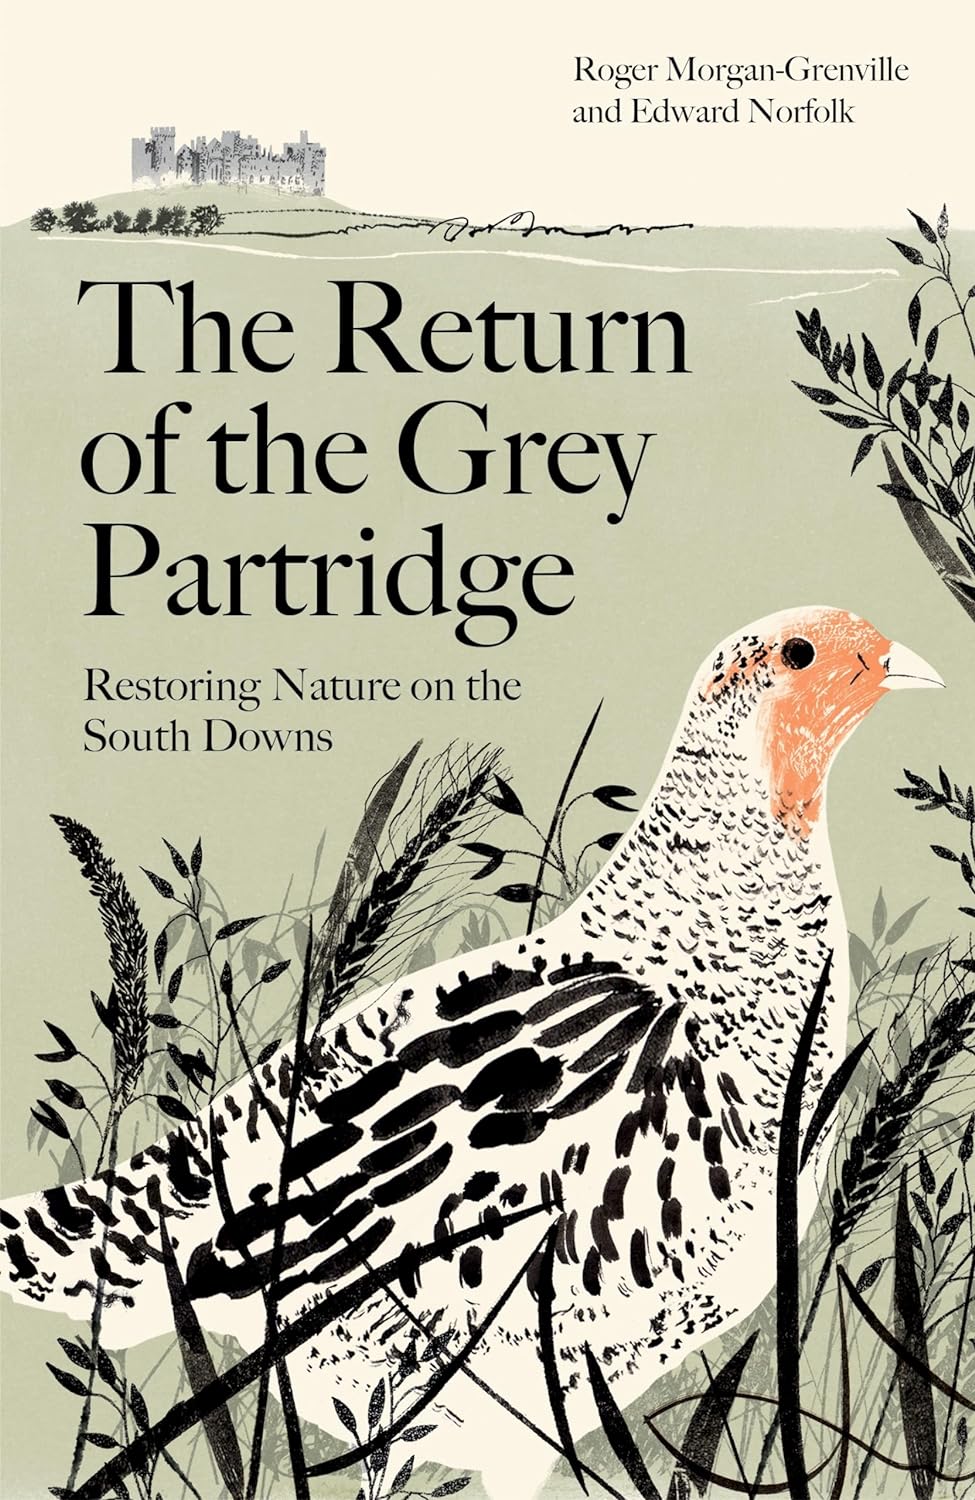 The Return of the Grey Partridge: Restoring Nature on the South Downs